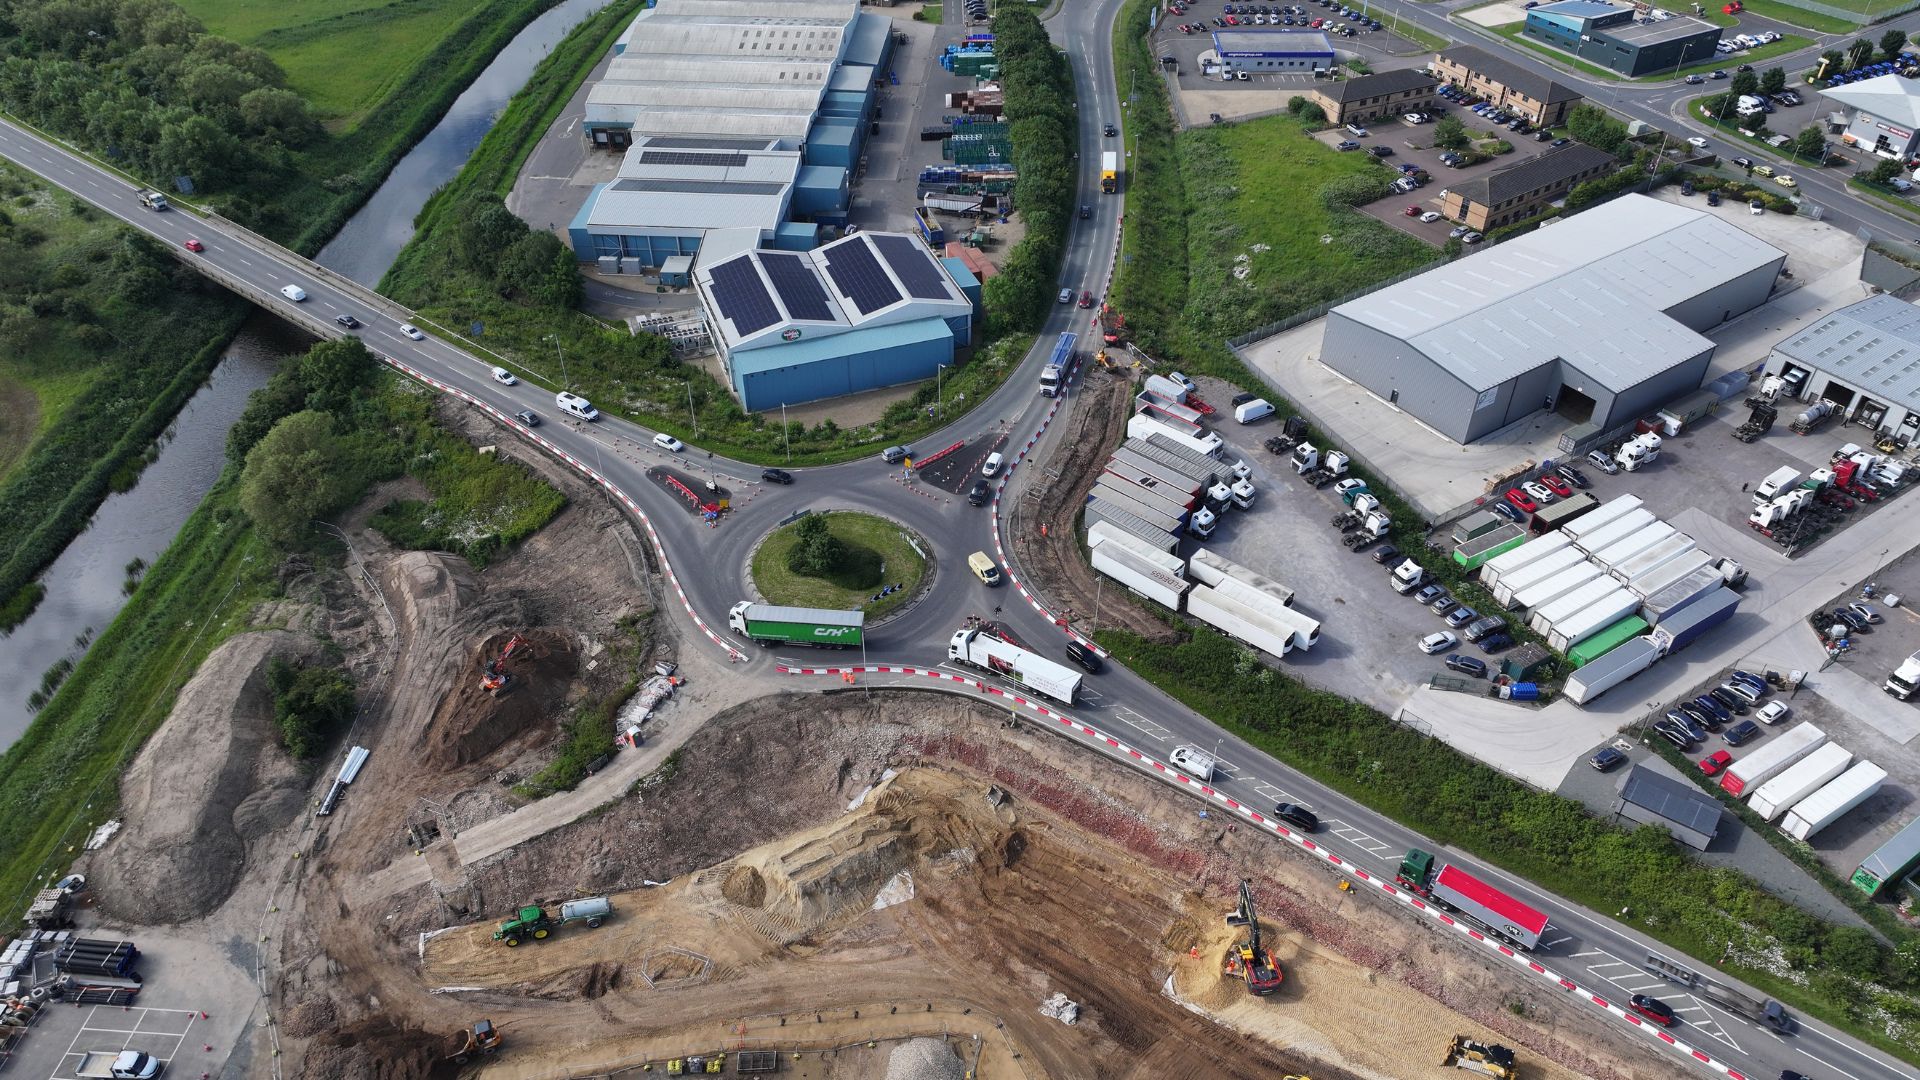 An overhead view of Pinchbeck Roundabout